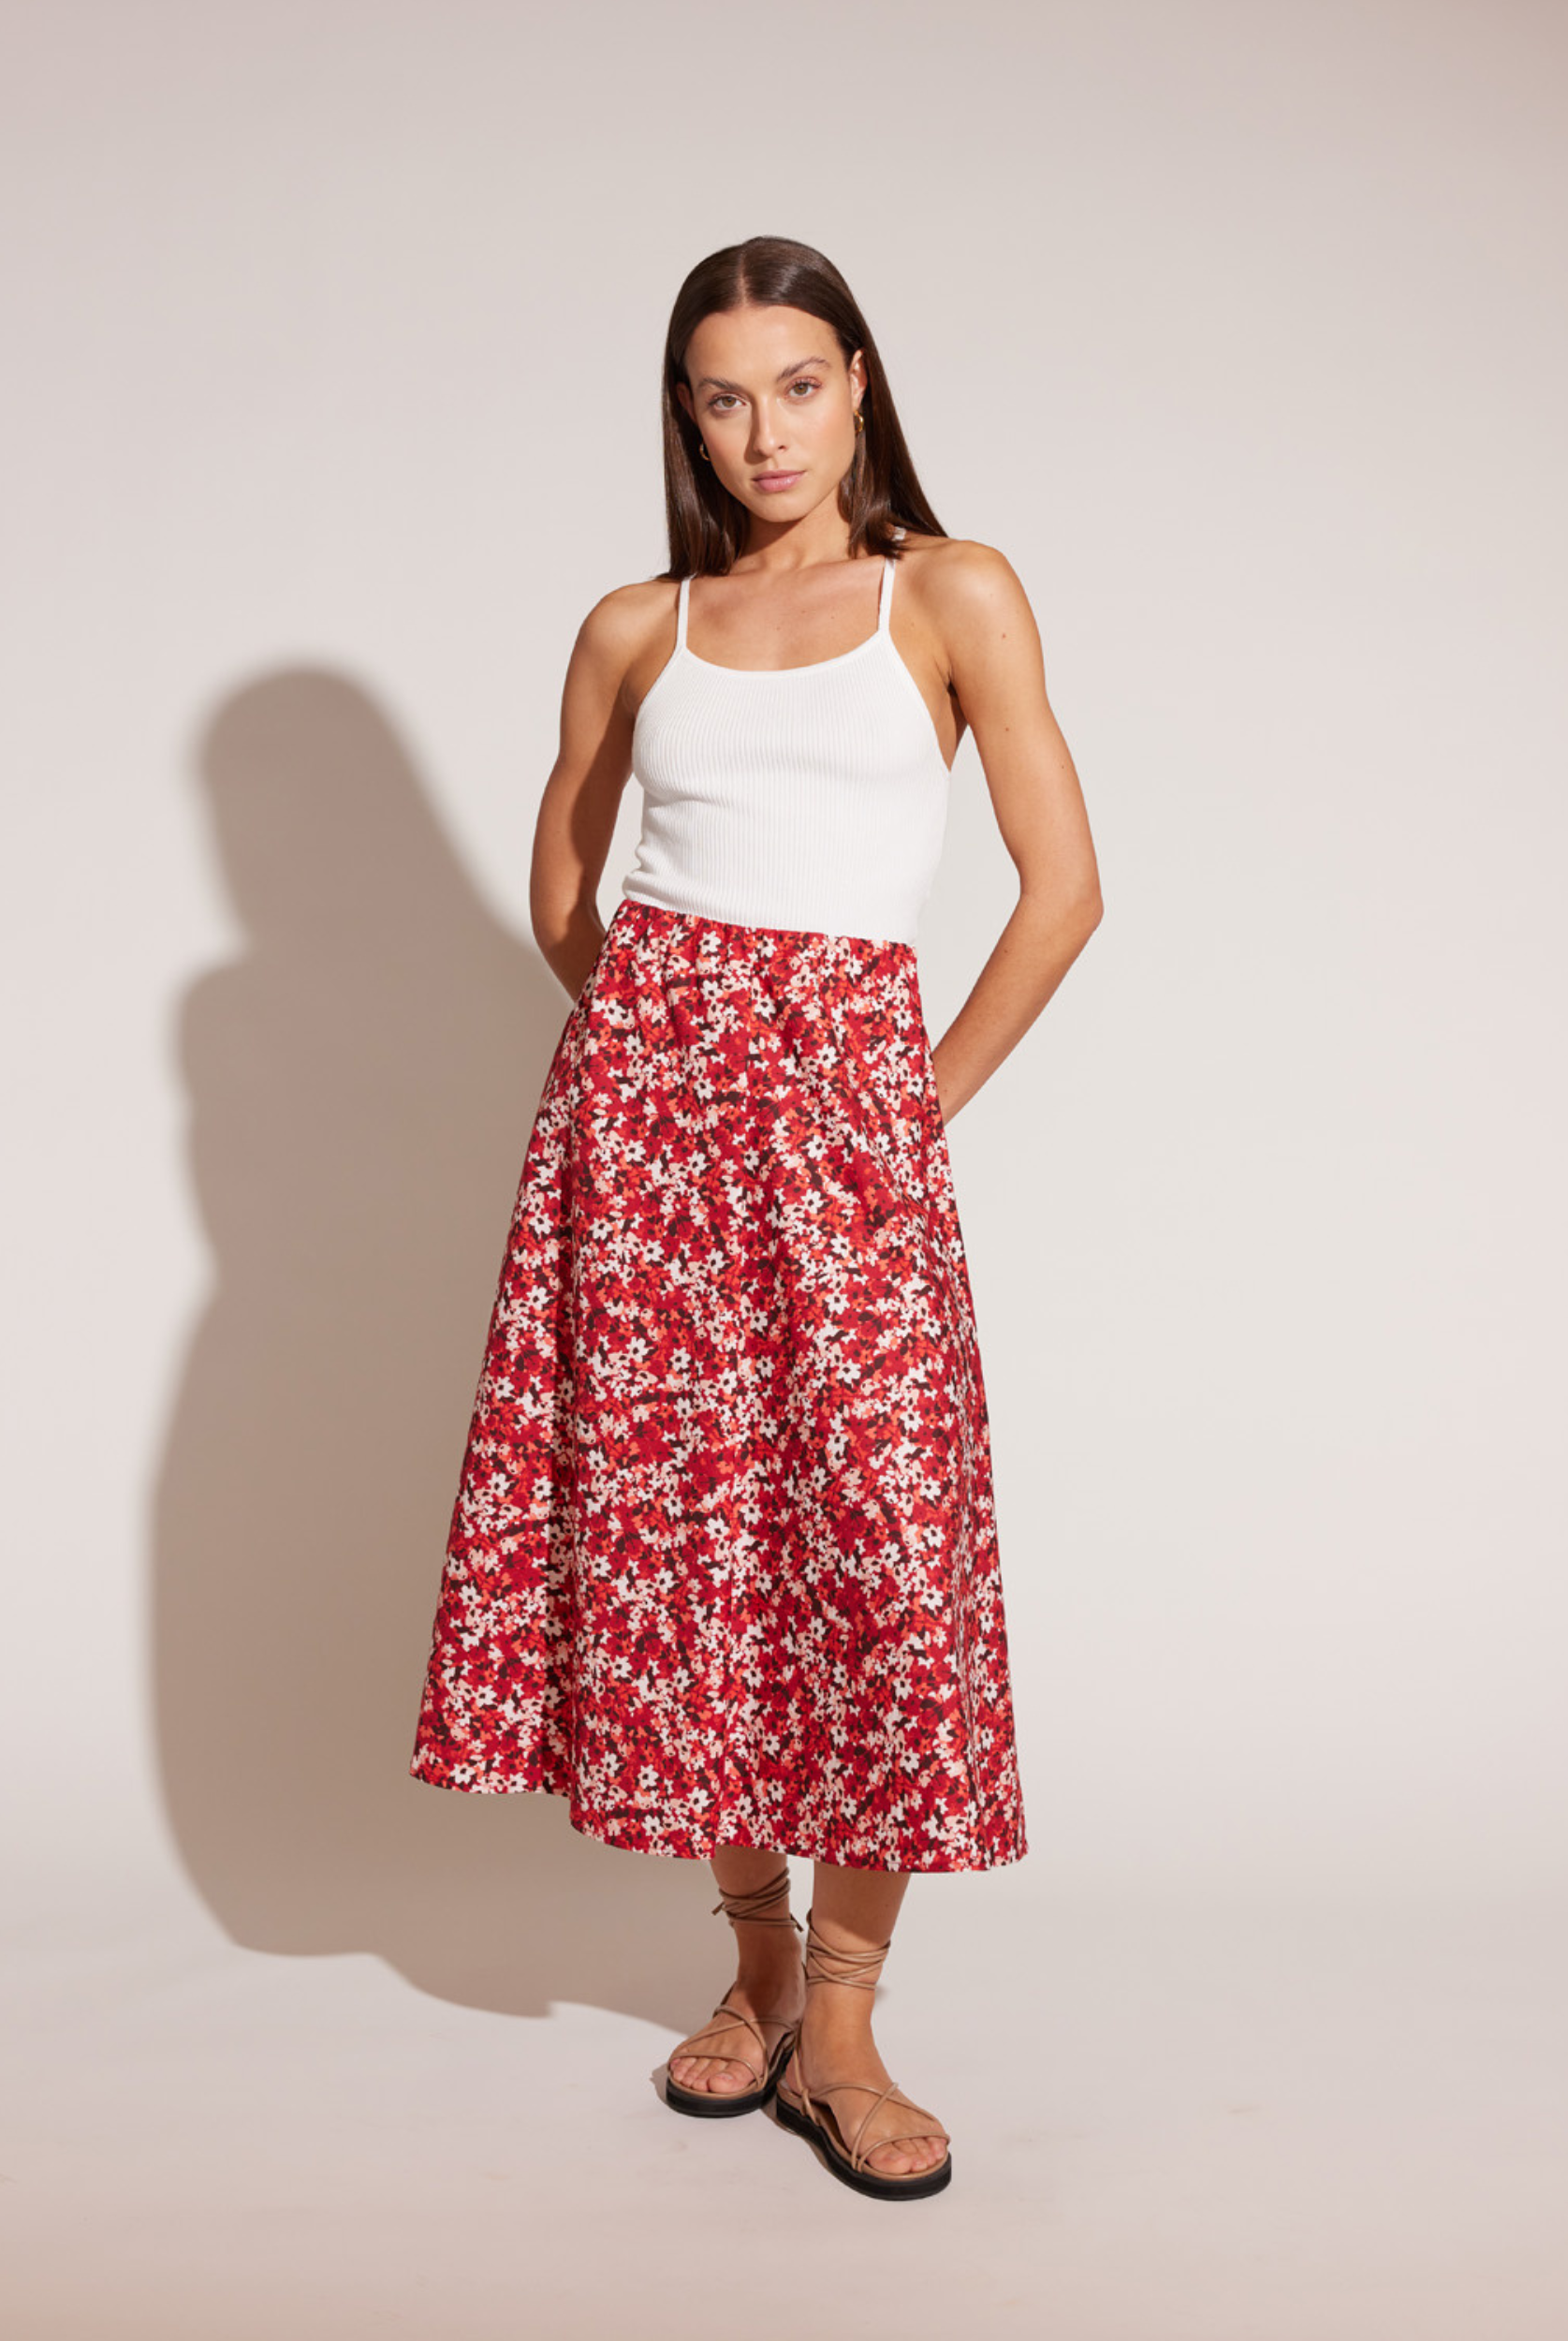 Model wearing red floral print bias cut Midi Skirt in red ditzy floral